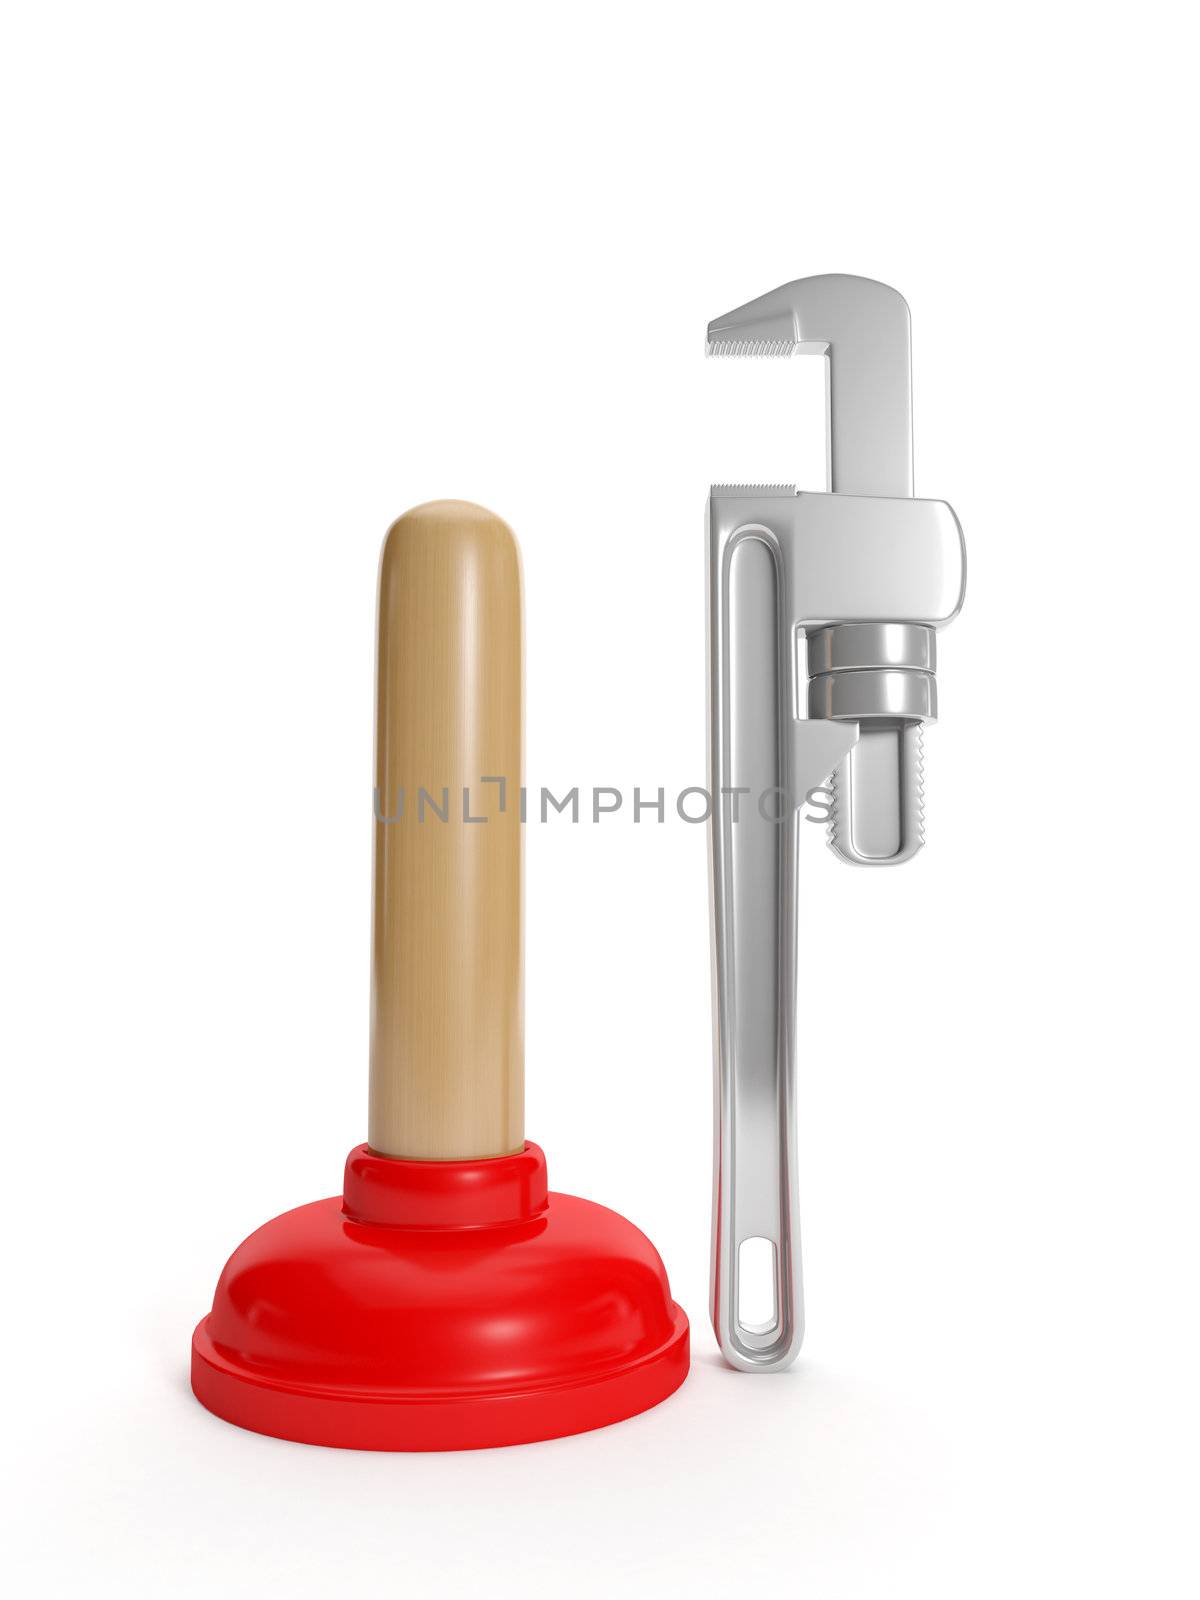 3D Illustration: plunger and a wrench on a white background